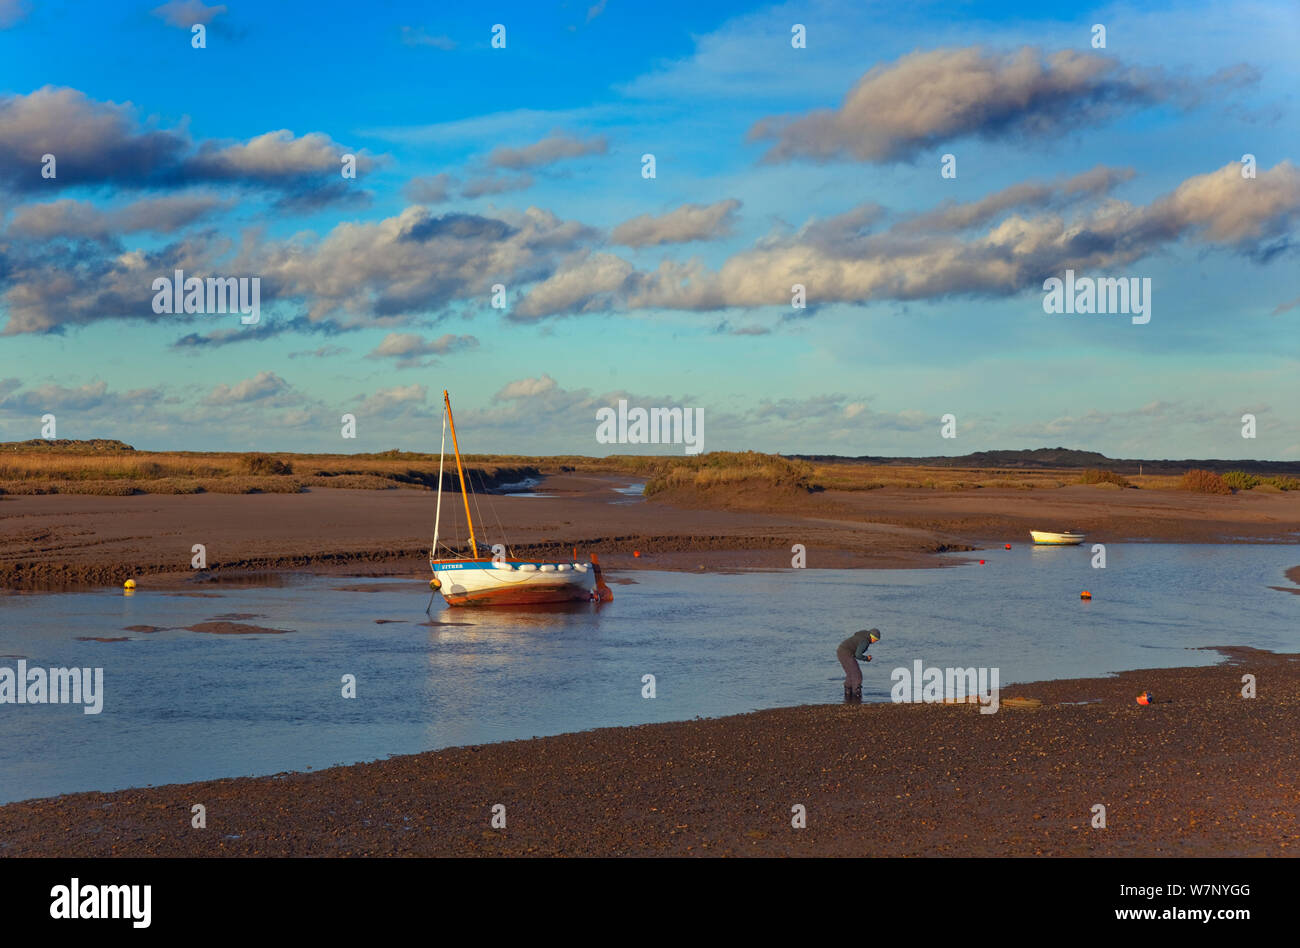 Boat on beach at low tide, Burnham Overy Staith, Norfolk, November 2012 Stock Photo